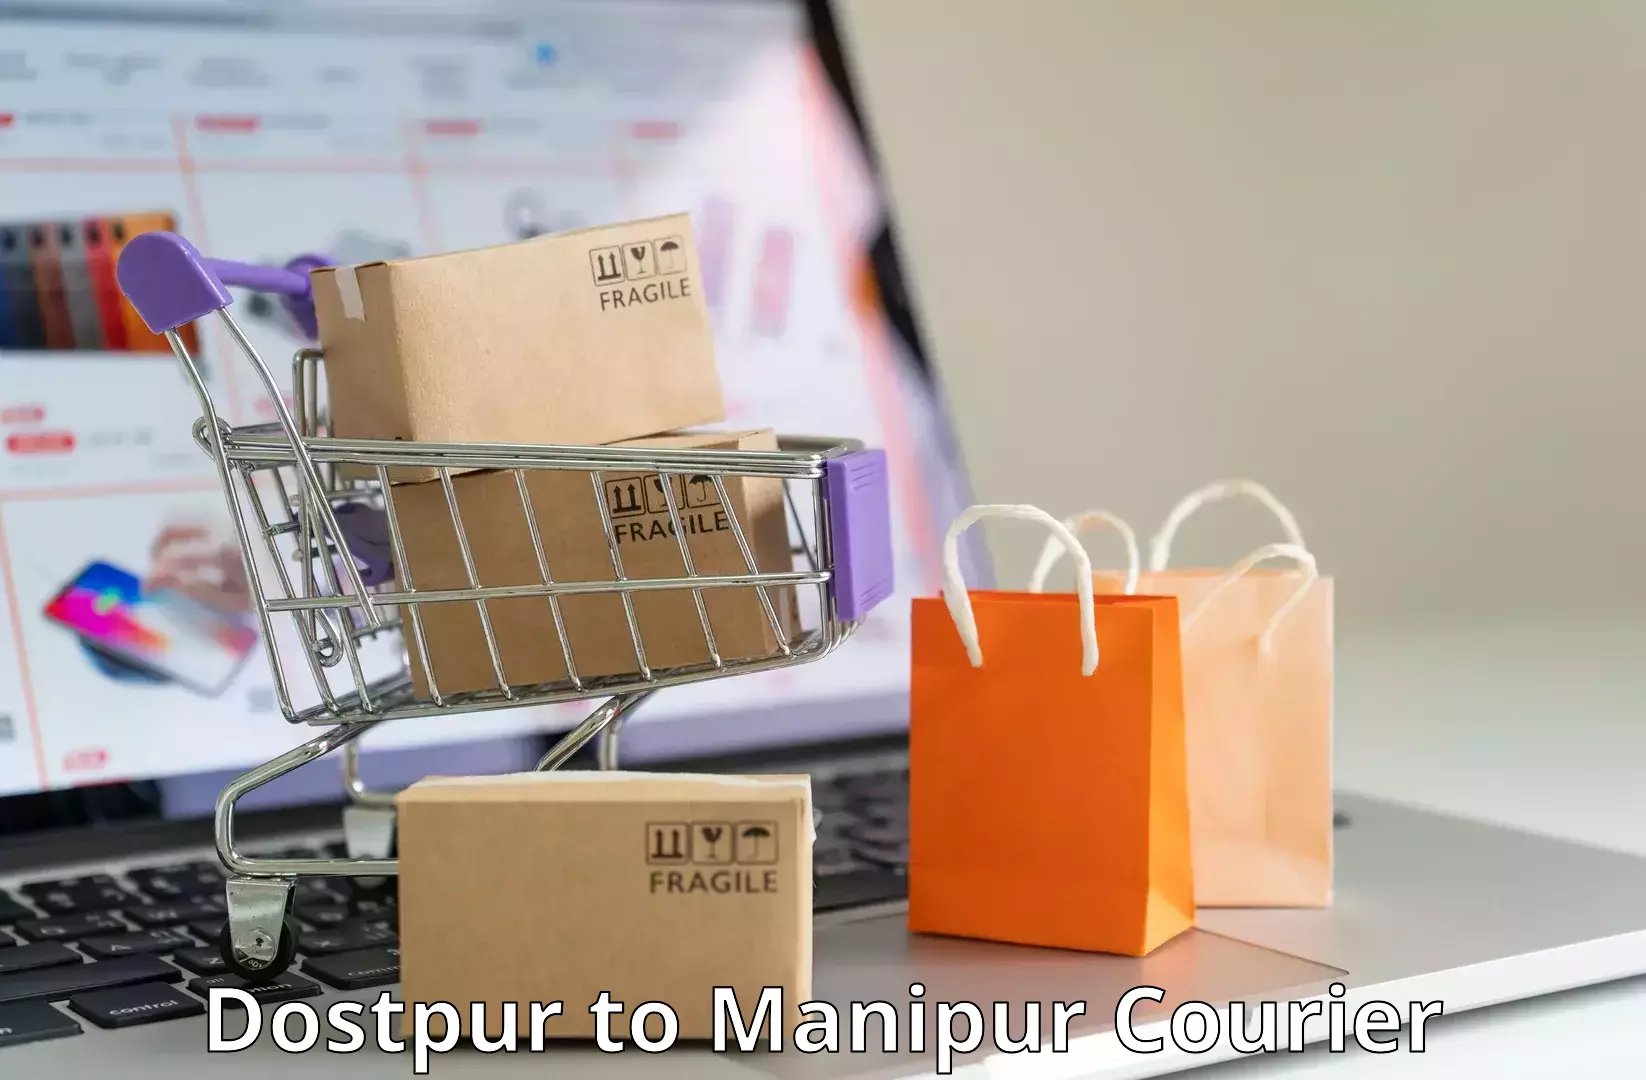 International courier networks Dostpur to Imphal